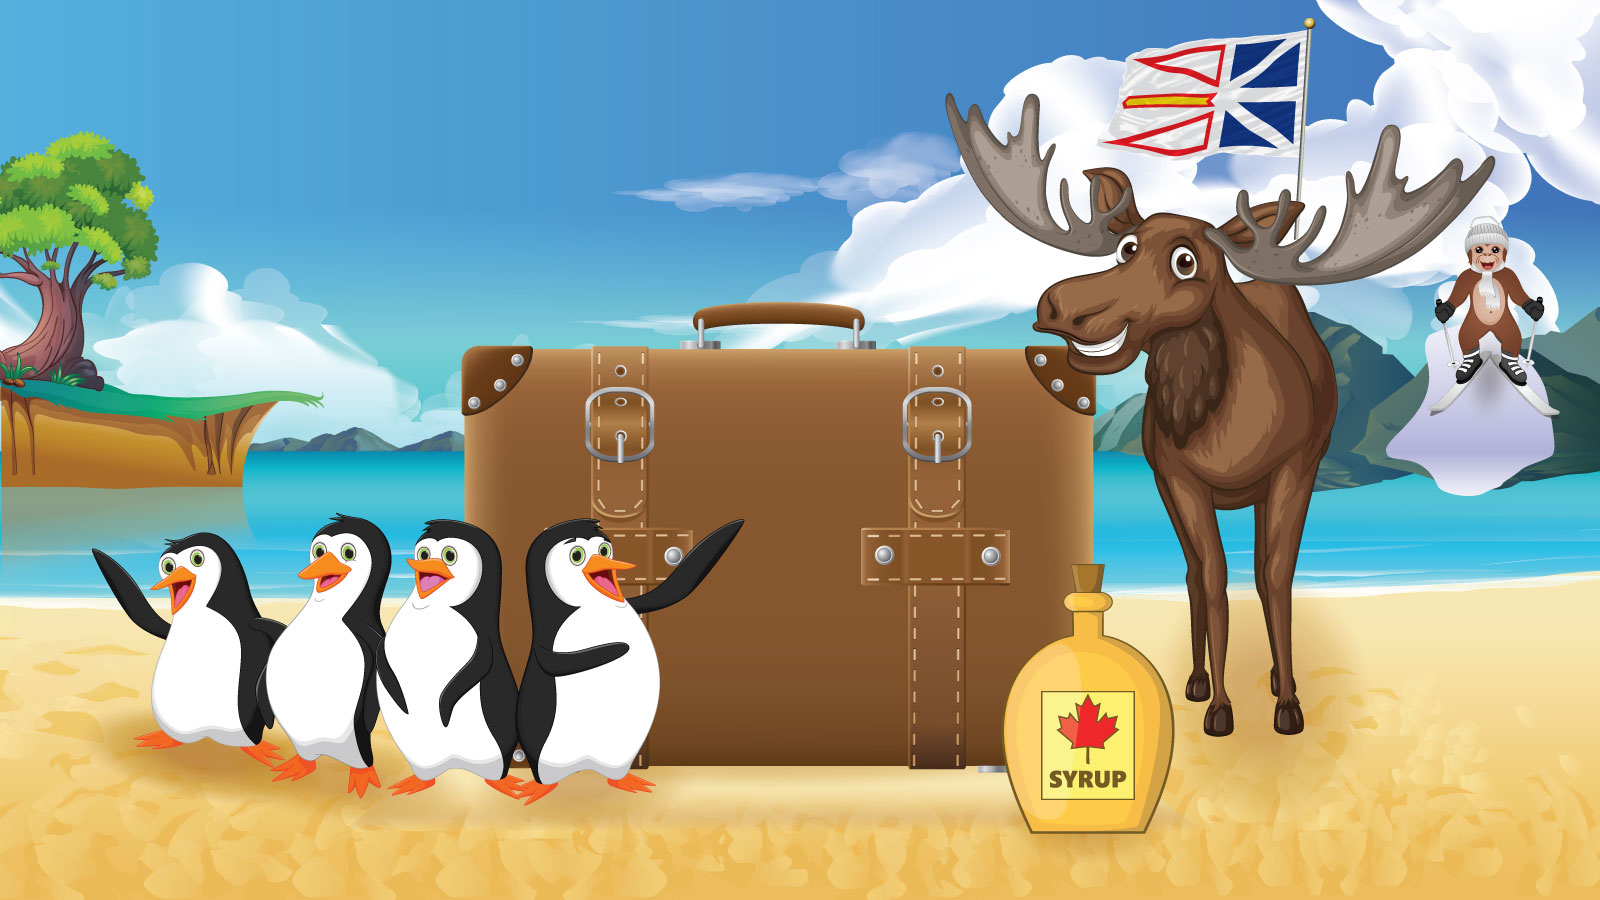 An illustration of a luggage on a beach with a bottle of maple syrup, penguins and moose smiling with a cliff in the background with a monkey skiing down a mountain